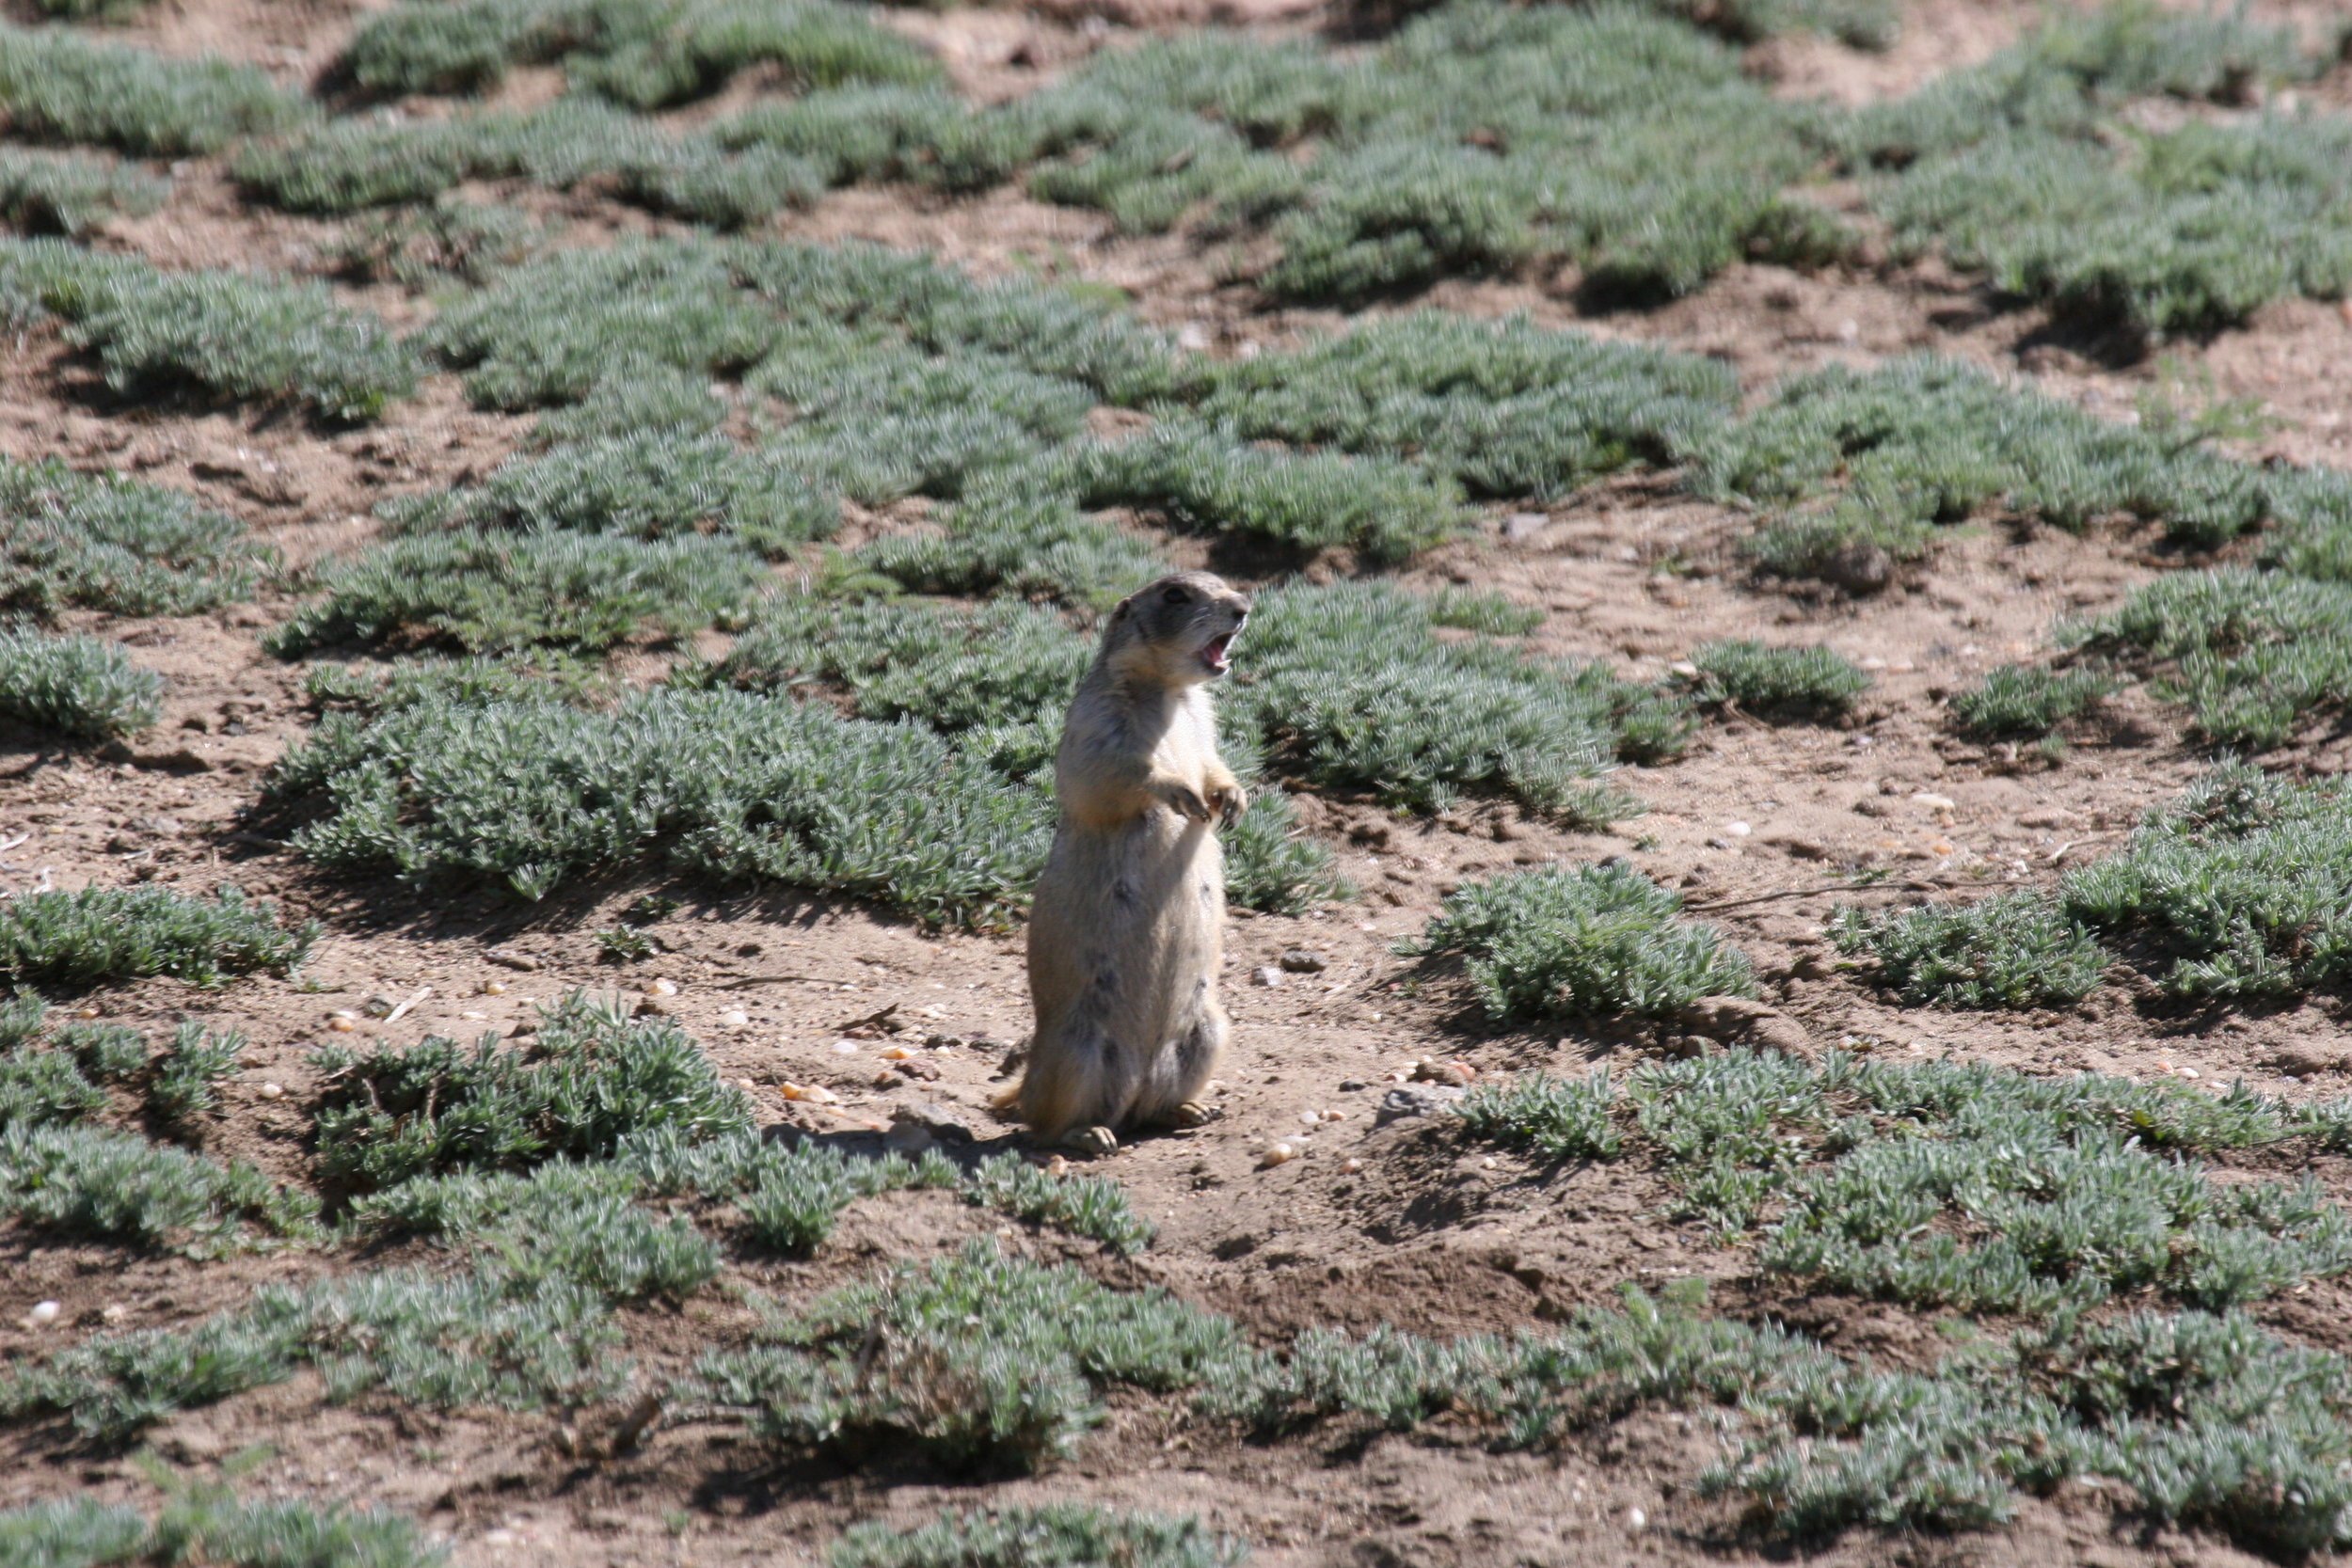  This white-tailed prairie dog female shows off her wide mouth giving an alarm call.  ©John Hoogland 2007  